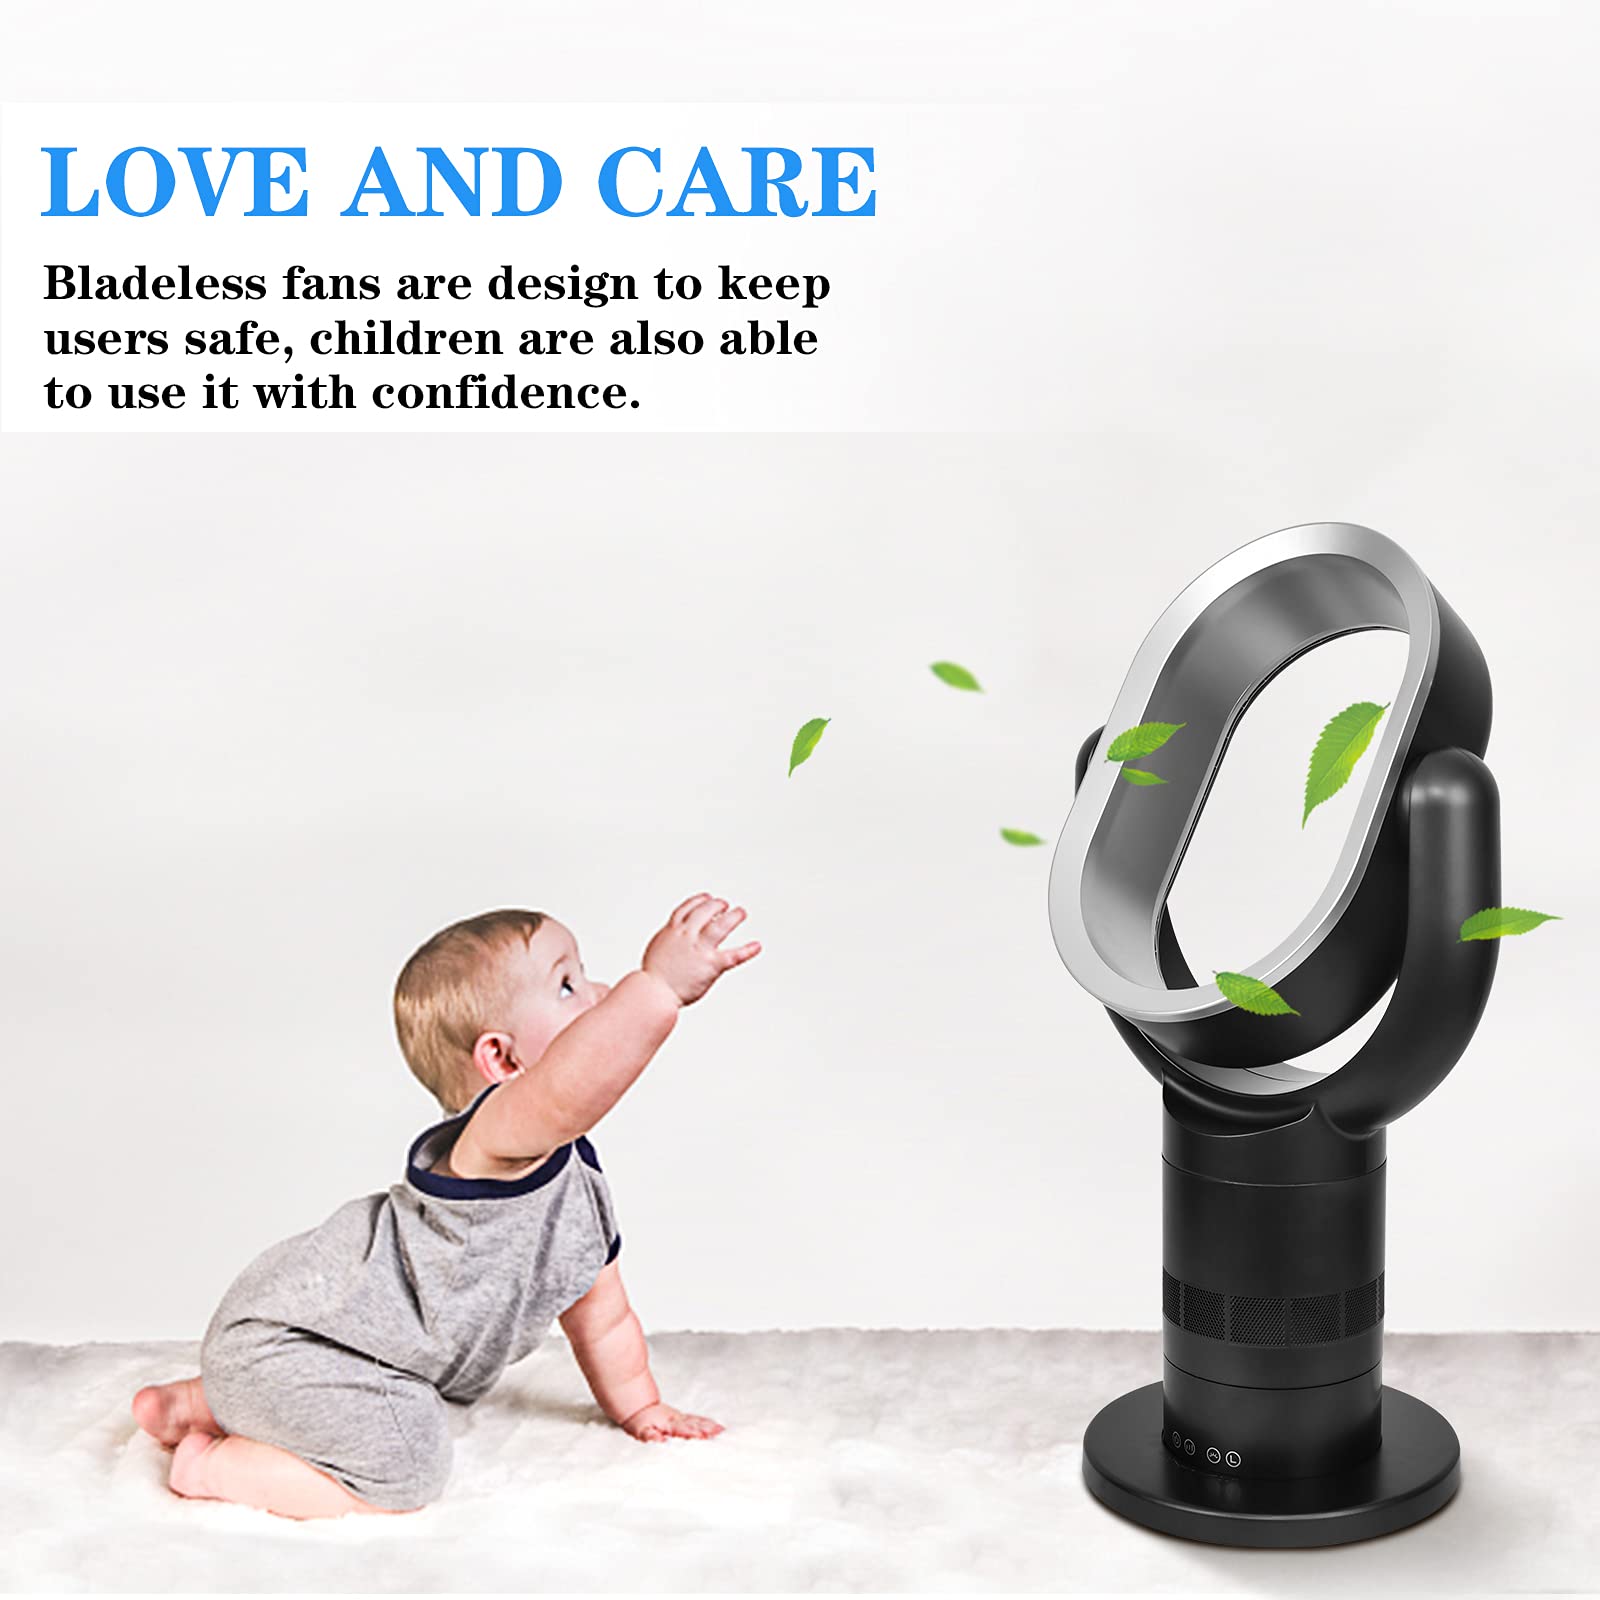 Simple Deluxe Medium size portable bladeless fan, small table fan, 10 speeds settings, 10-hour timing closure bladeless fan, stylish and modern fan, low noise, lightweight, 24 inches, black